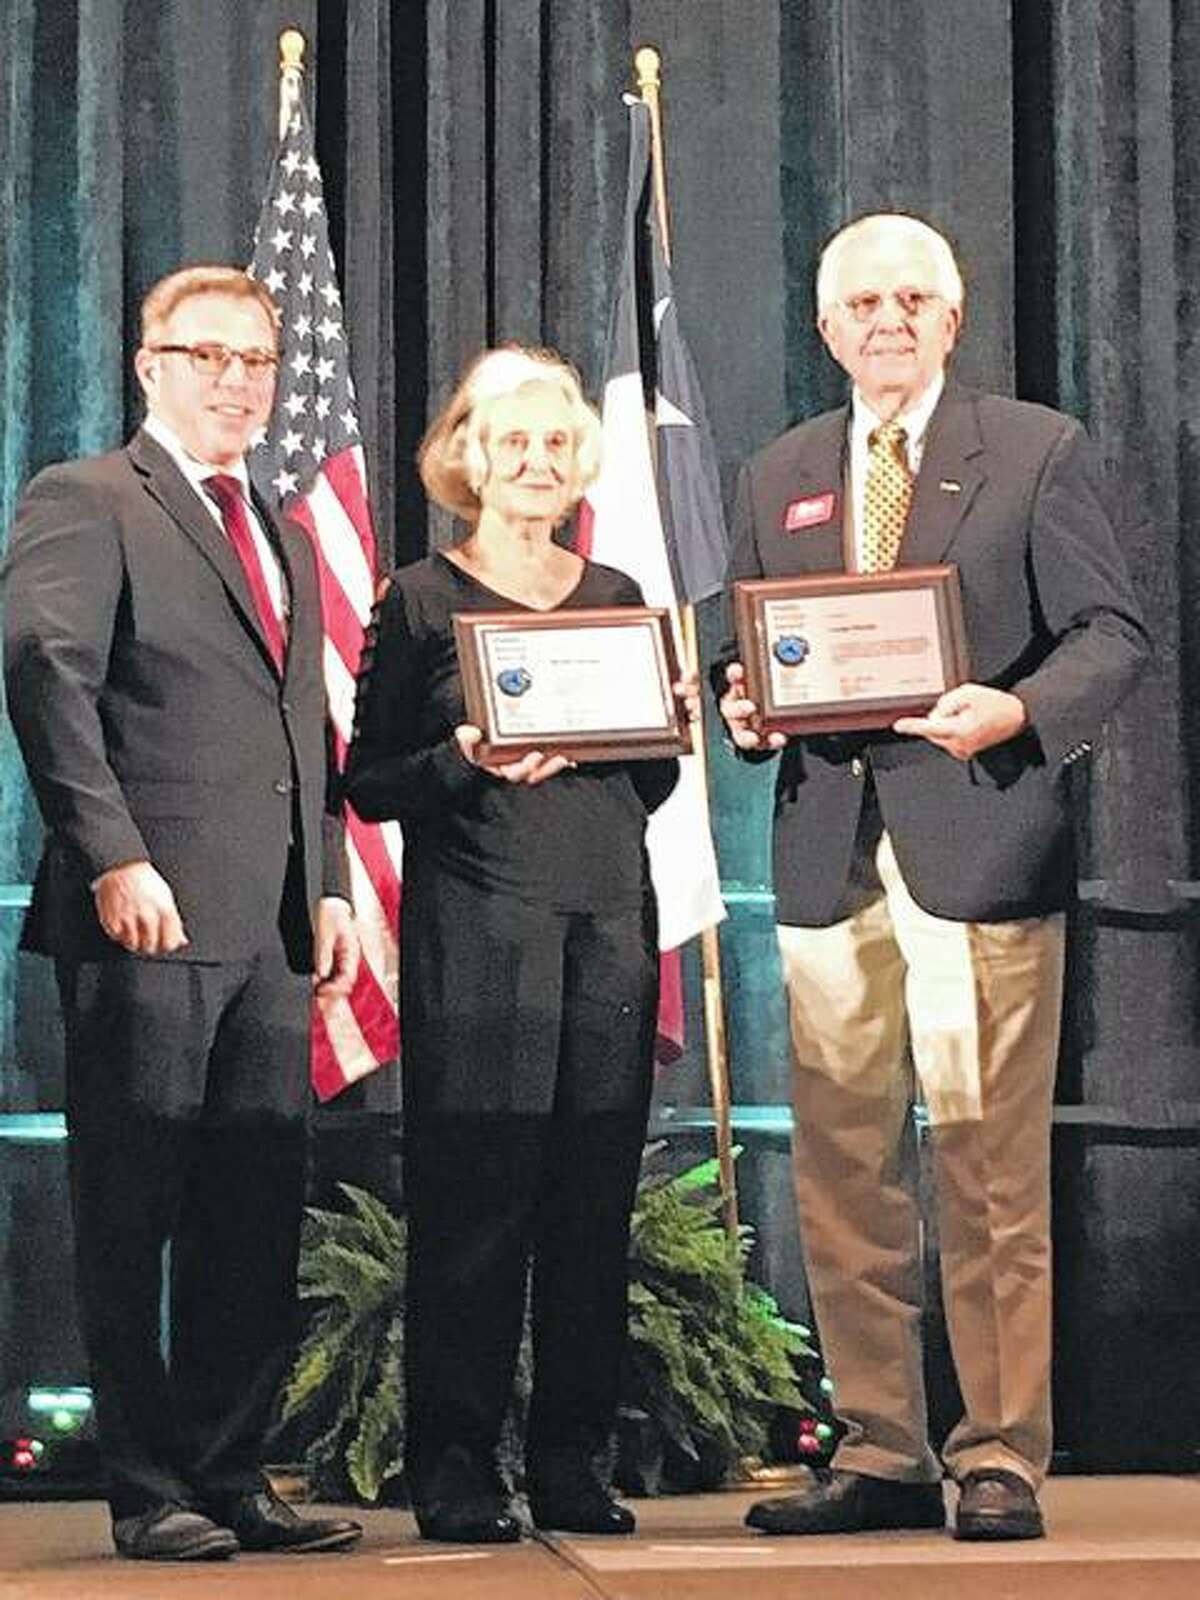 Jack Danielson, executive director of the U.S. Department of Transportation, awards George and Marilyn Murphy in San Antonio, Texas.